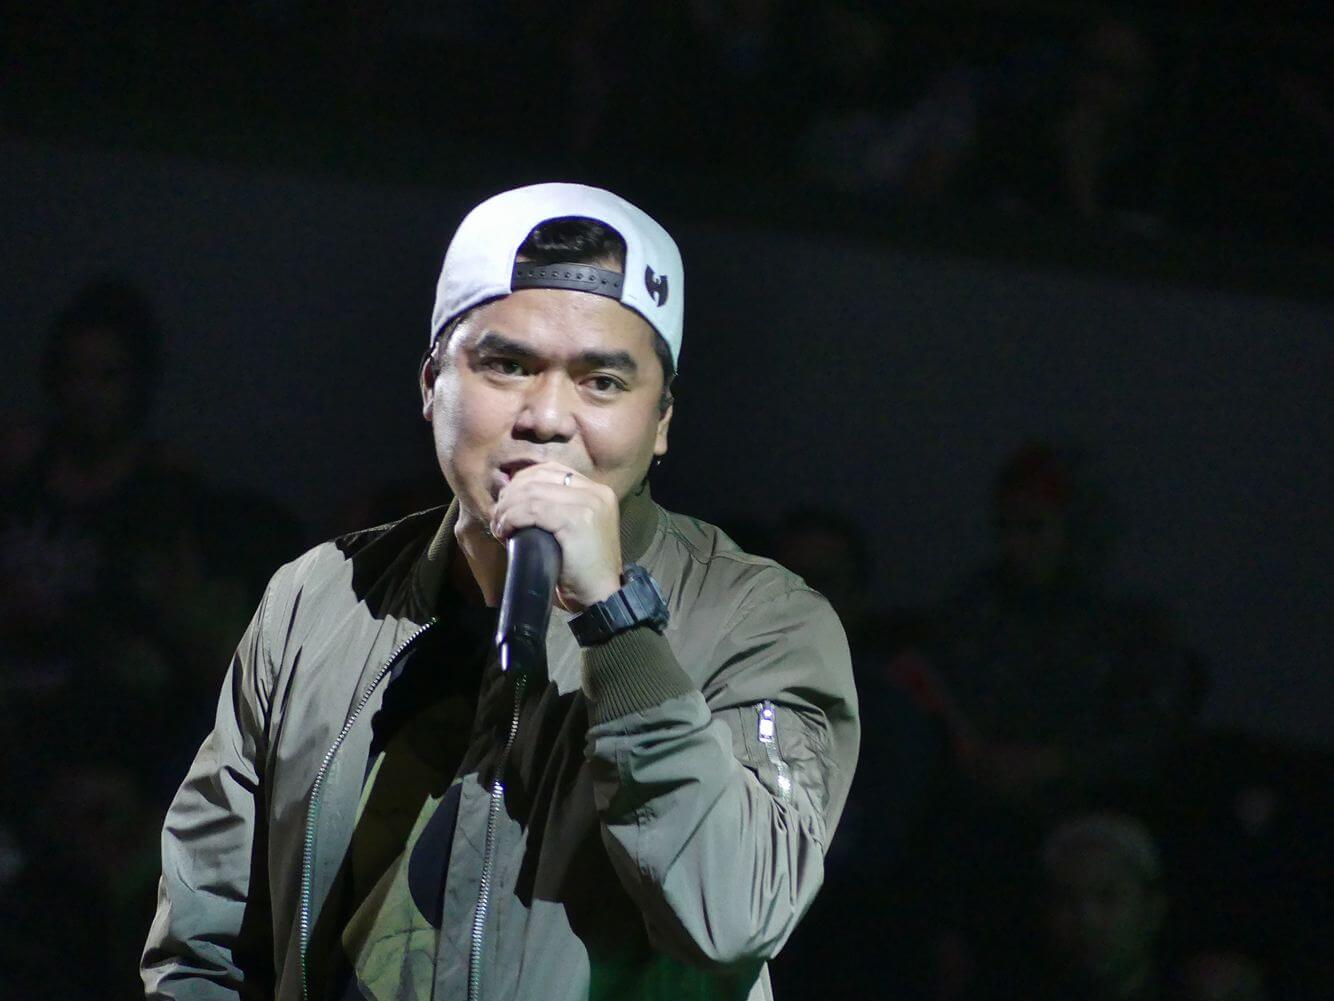 How to Gloc-9 It: The Ace Rapper on Political and Social Stereotypes, Art and Musical Legacy